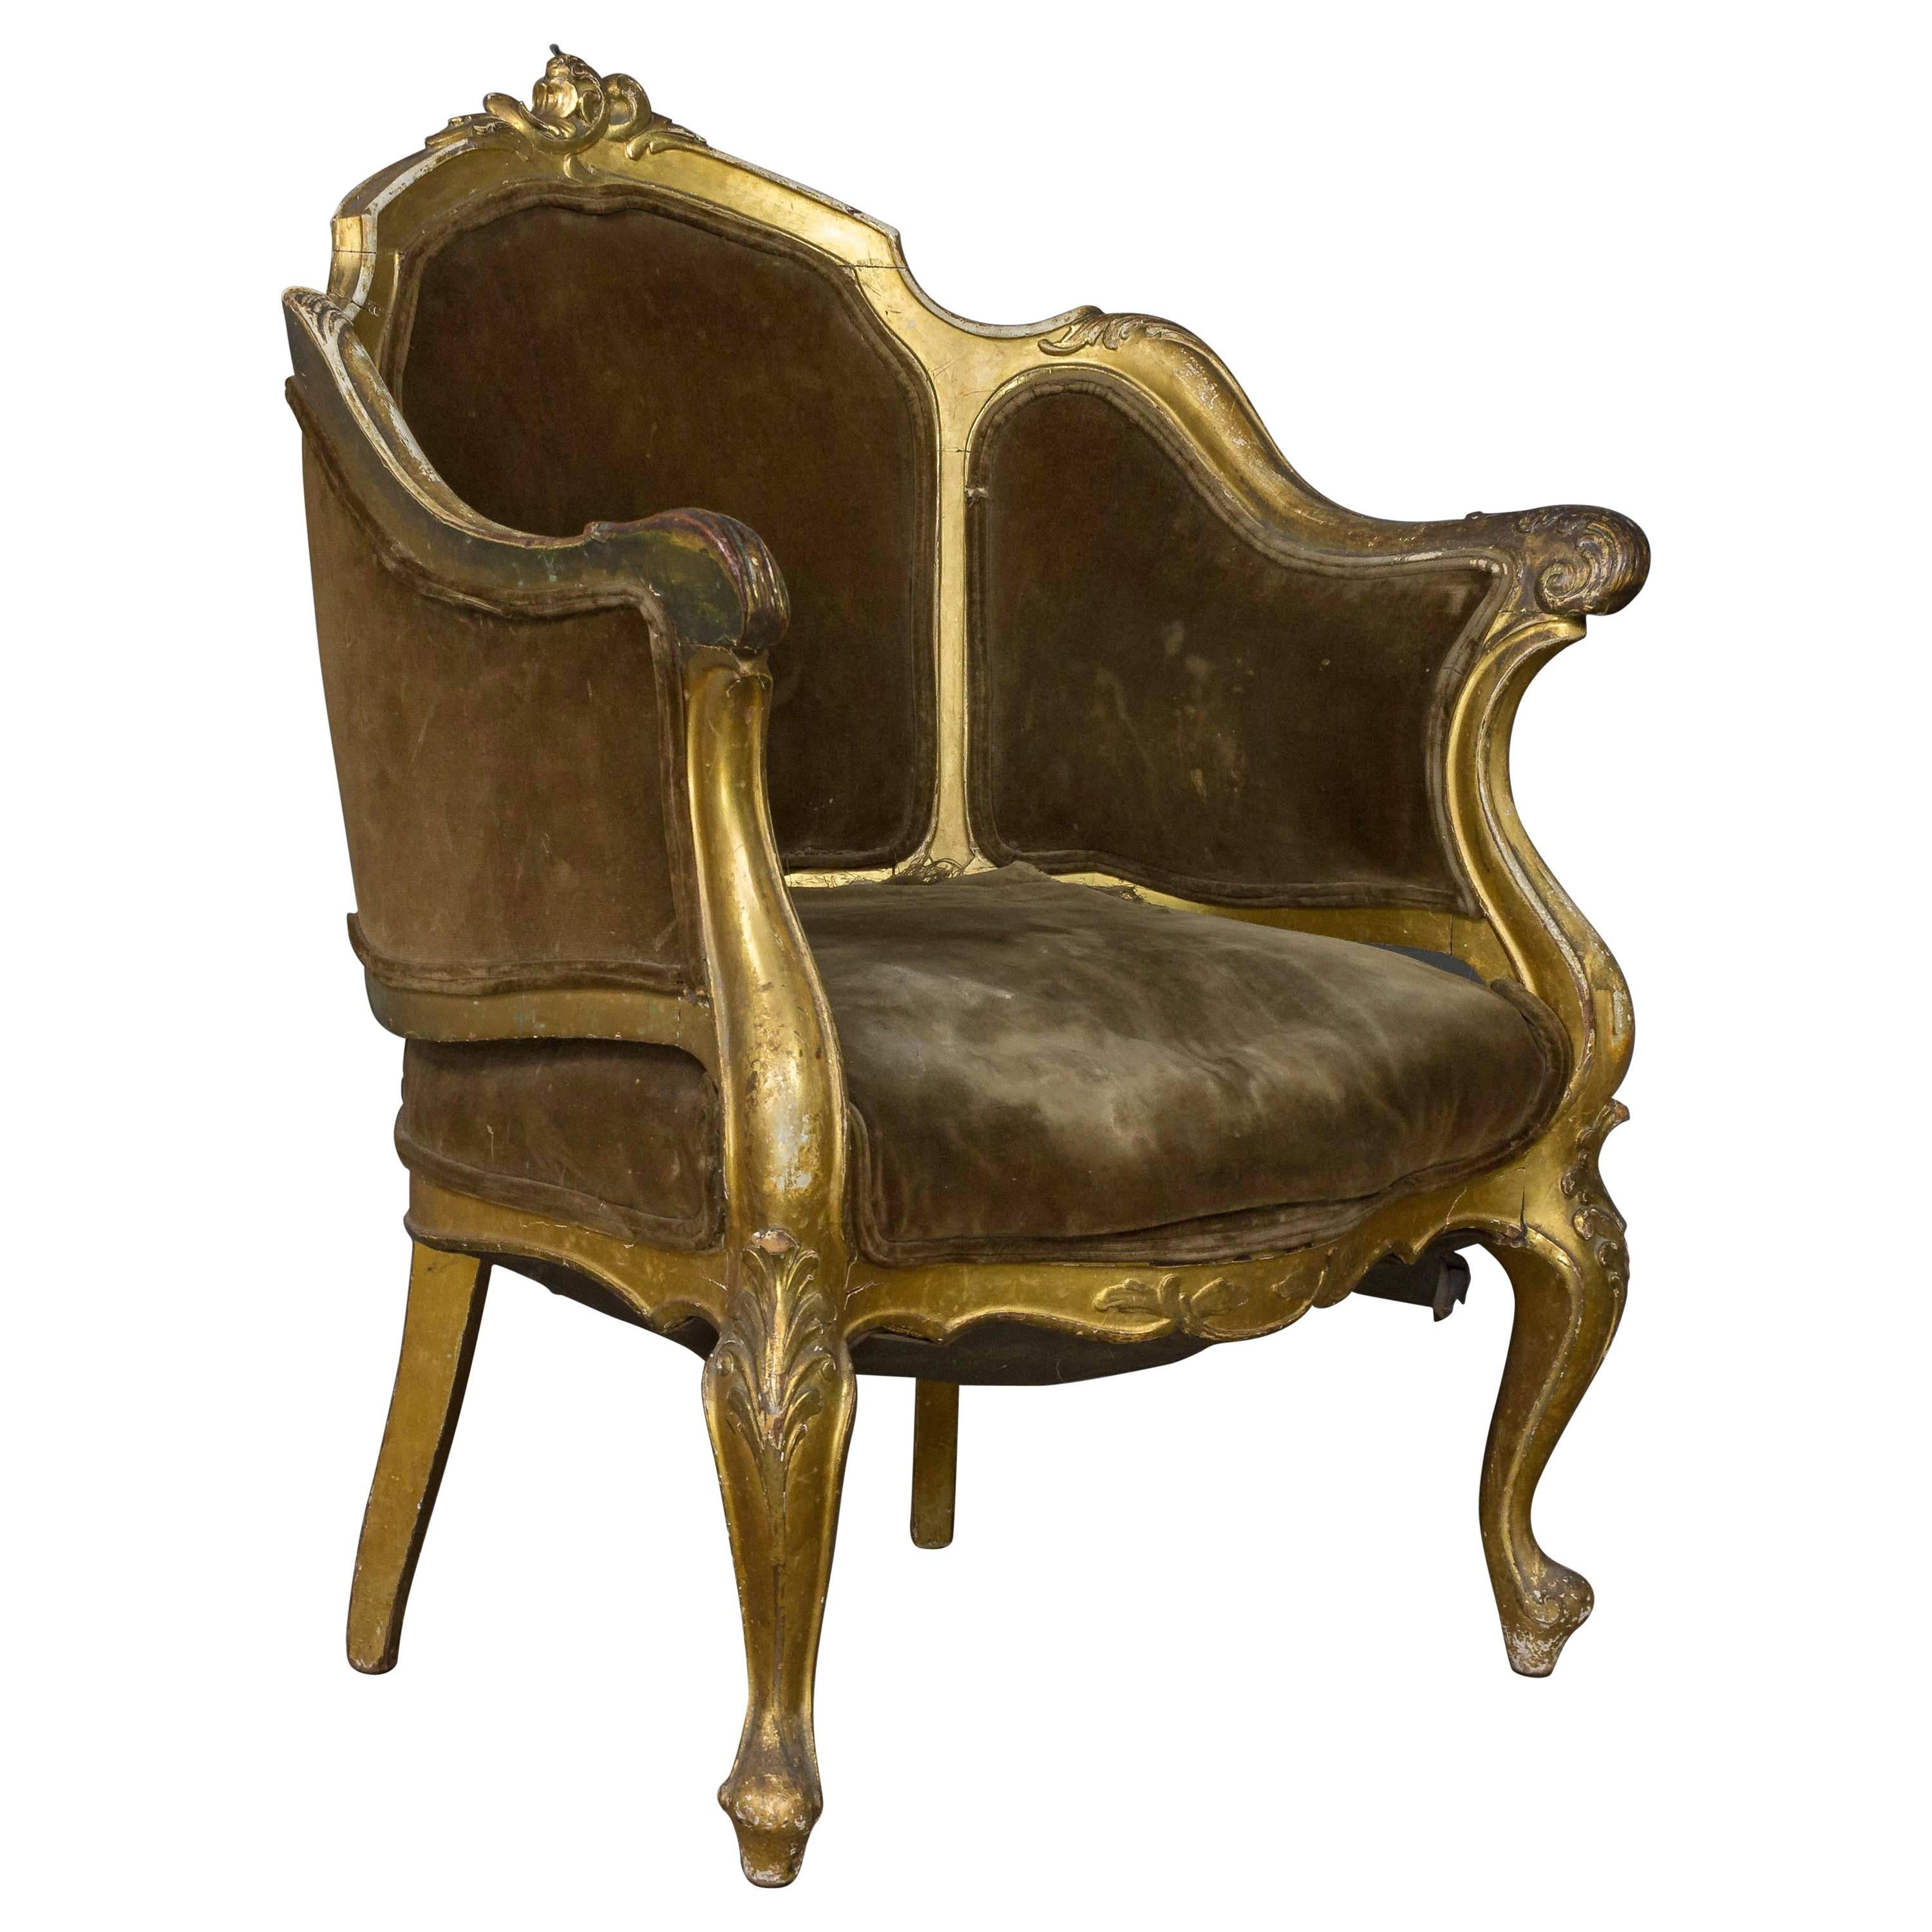 French 19th Century Rococo Revival Giltwood Armchair For Sale